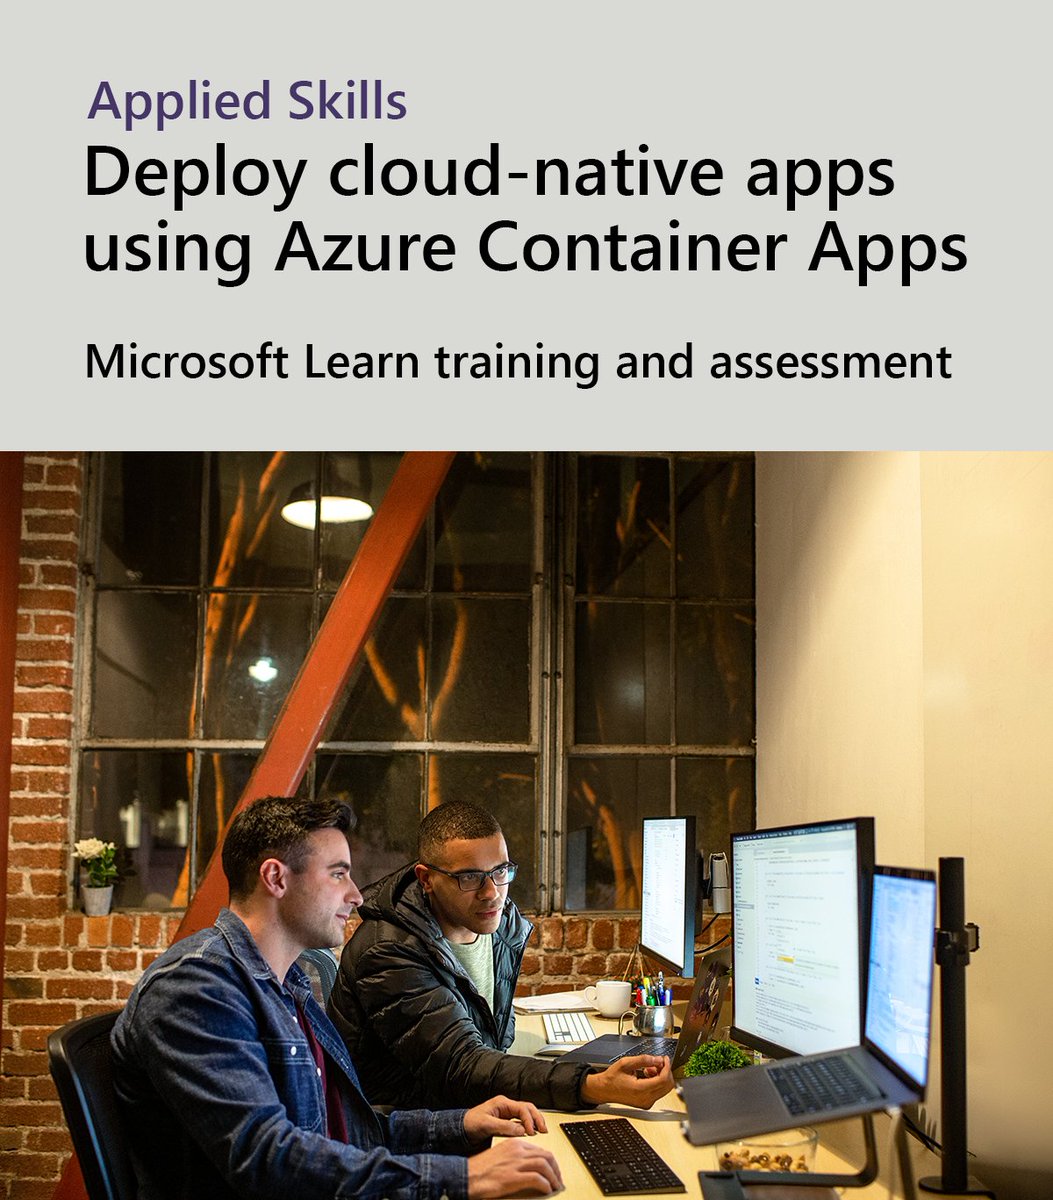 Learn how to build, deploy, scale, and manage containerized Cloud Native apps using Azure Container Apps, Azure Container Registry, and Azure Pipelines: msft.it/6011YMfWN #Azure